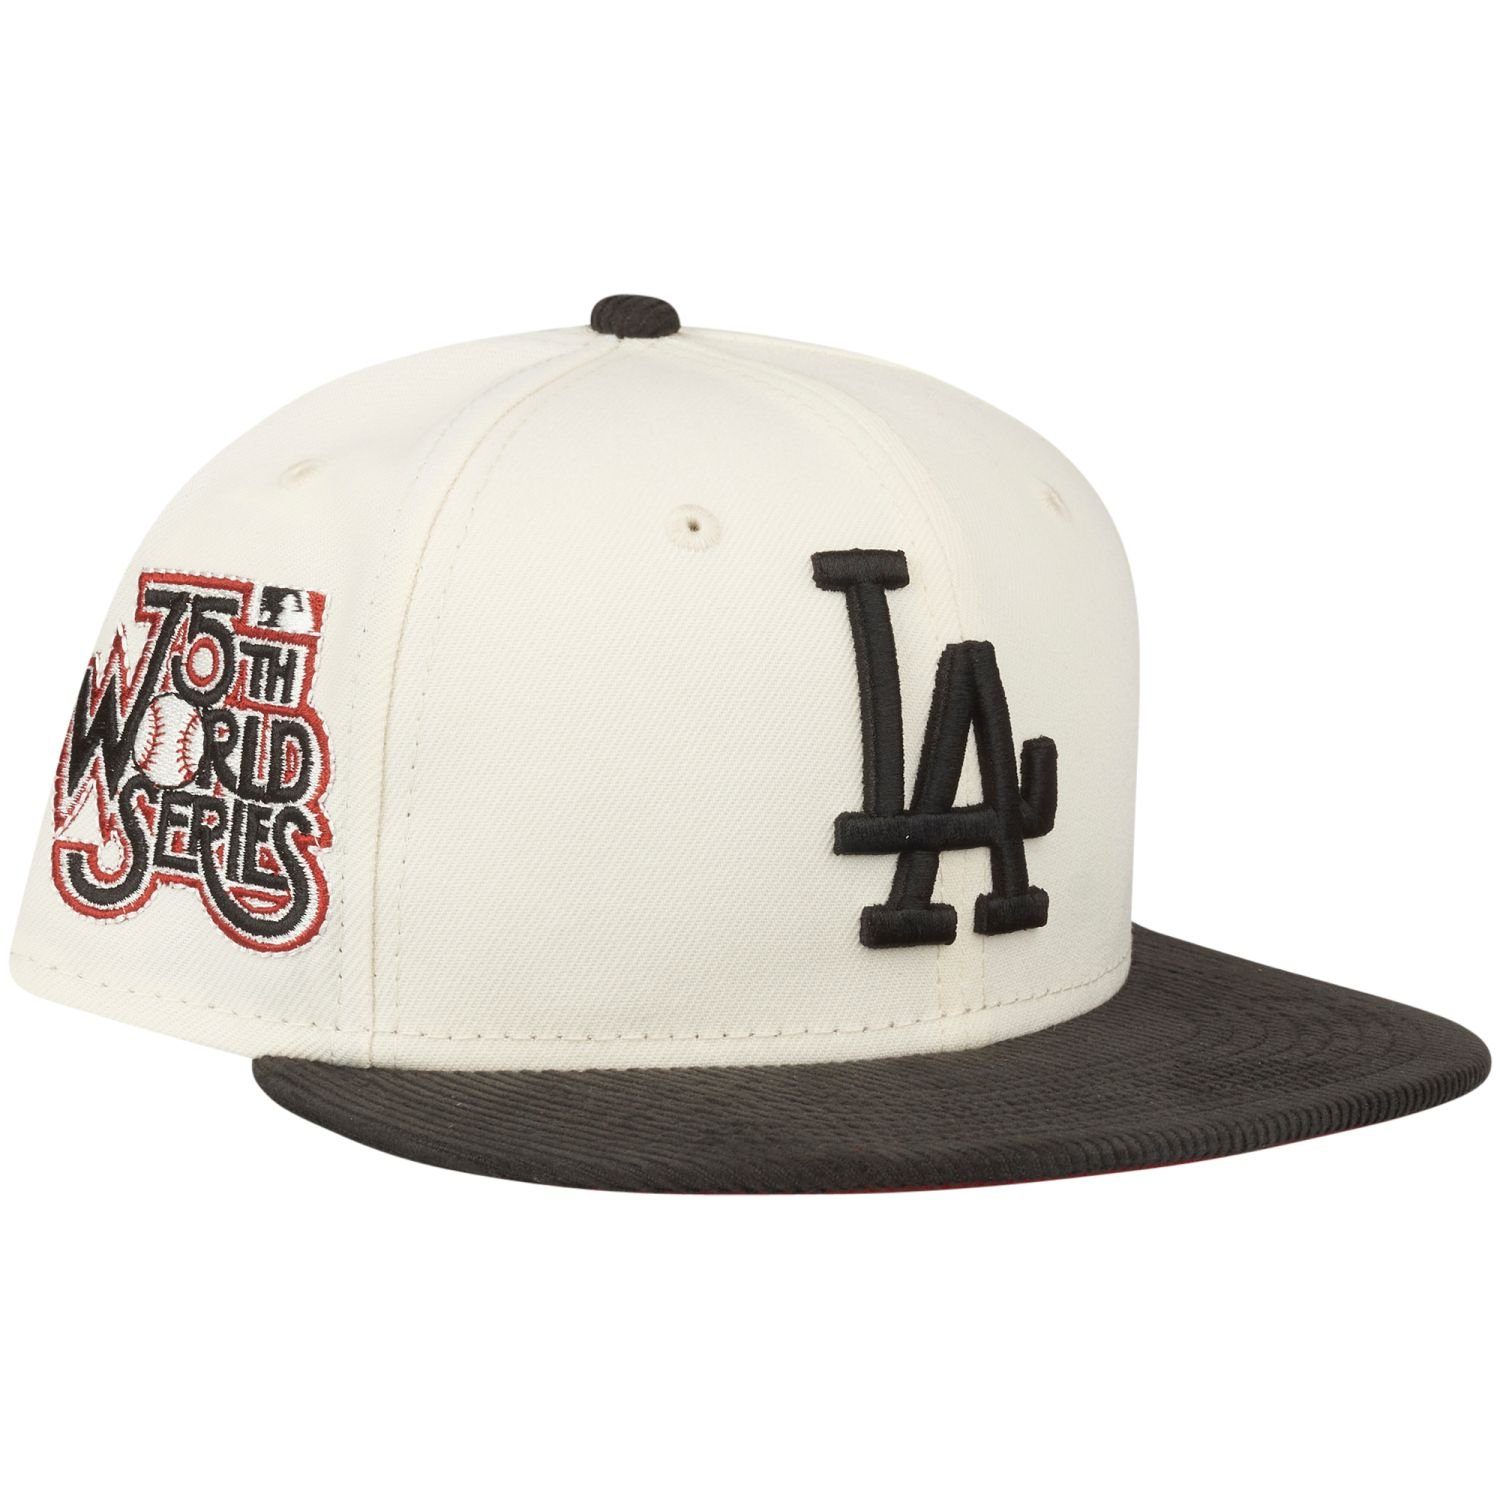 New Era Fitted Cap 59Fifty WORLD SERIES Los Angeles Dodgers